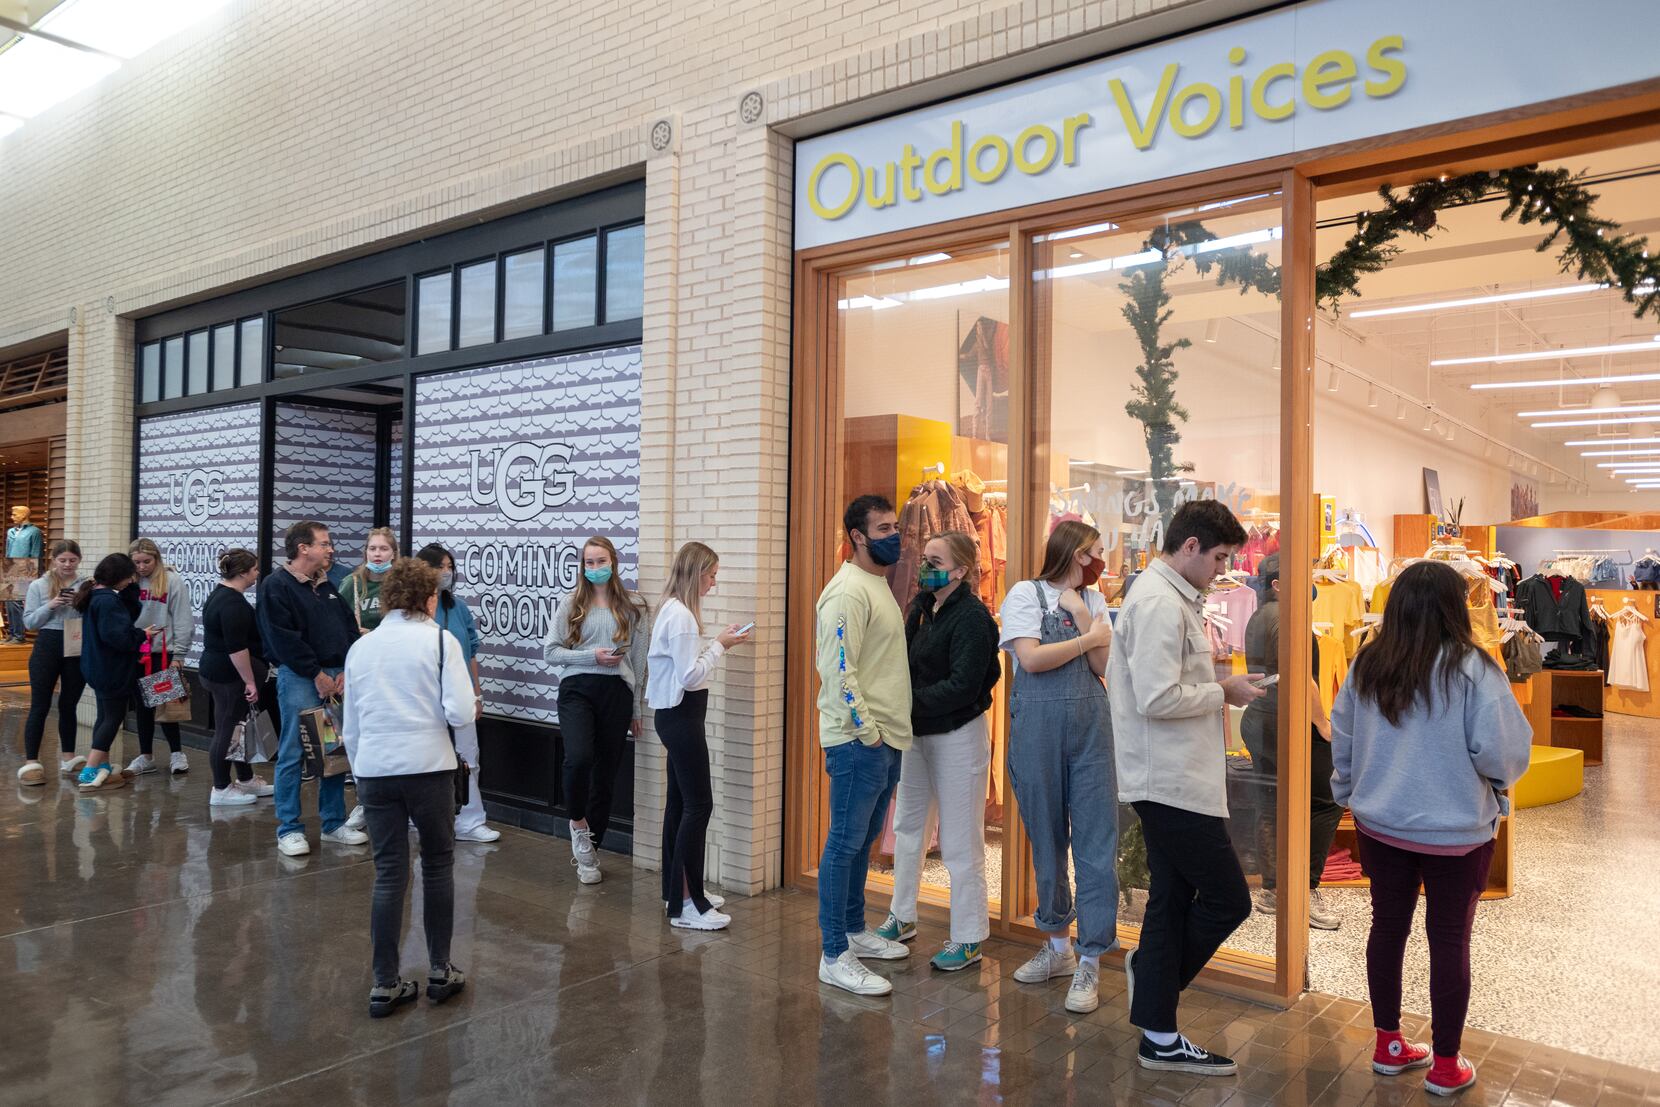 Athletic apparel retailer Outdoor Voices closes stores abruptly to